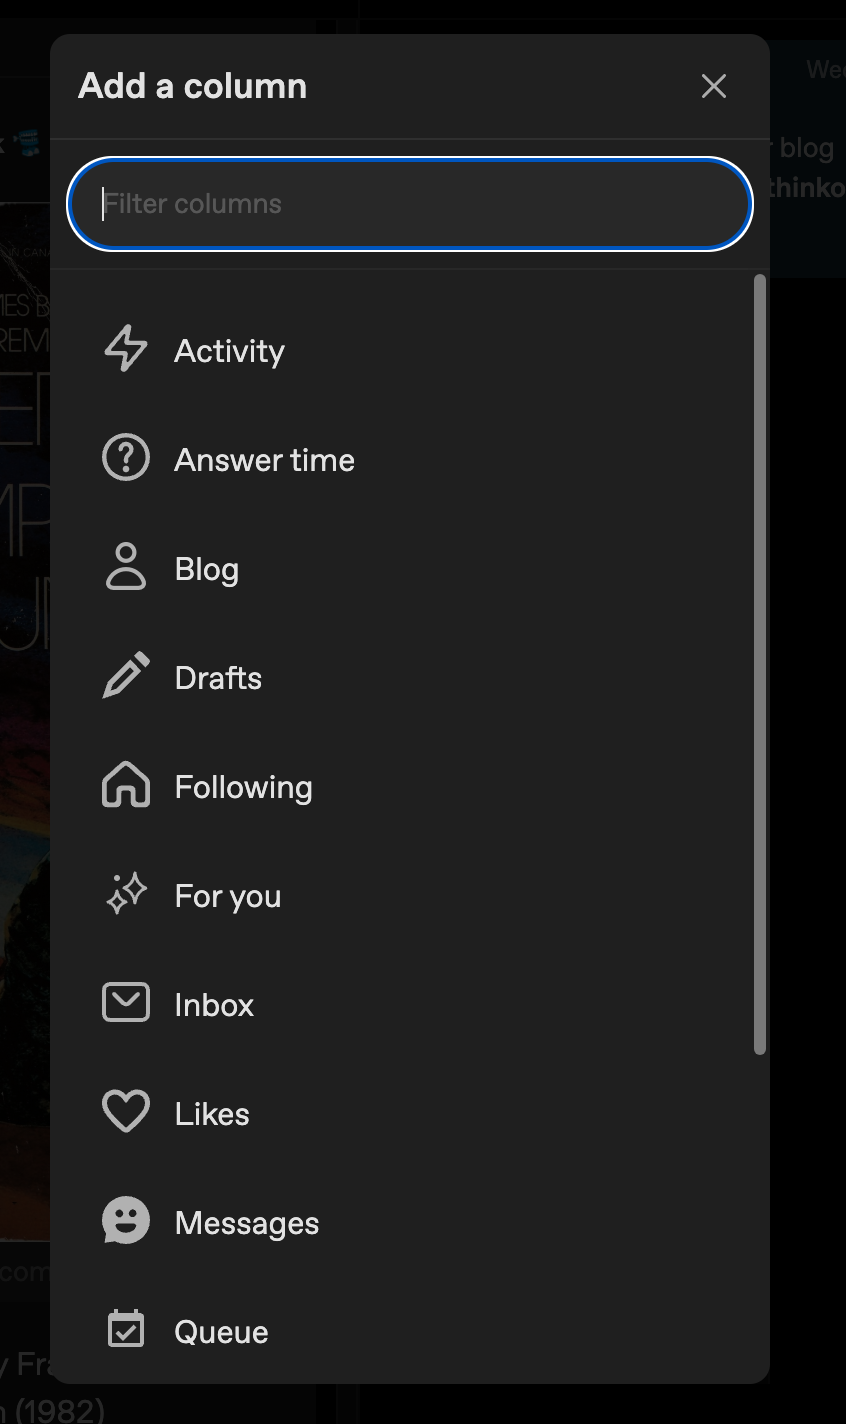 A screenshot of the "Add a column" pop-up. There's a search box to filter columns, along with a list of the different types of columns you can add - Activity, Answer time, Blog, Drafts, Following, For you, Inbox, Likes, Messages, and Queue.